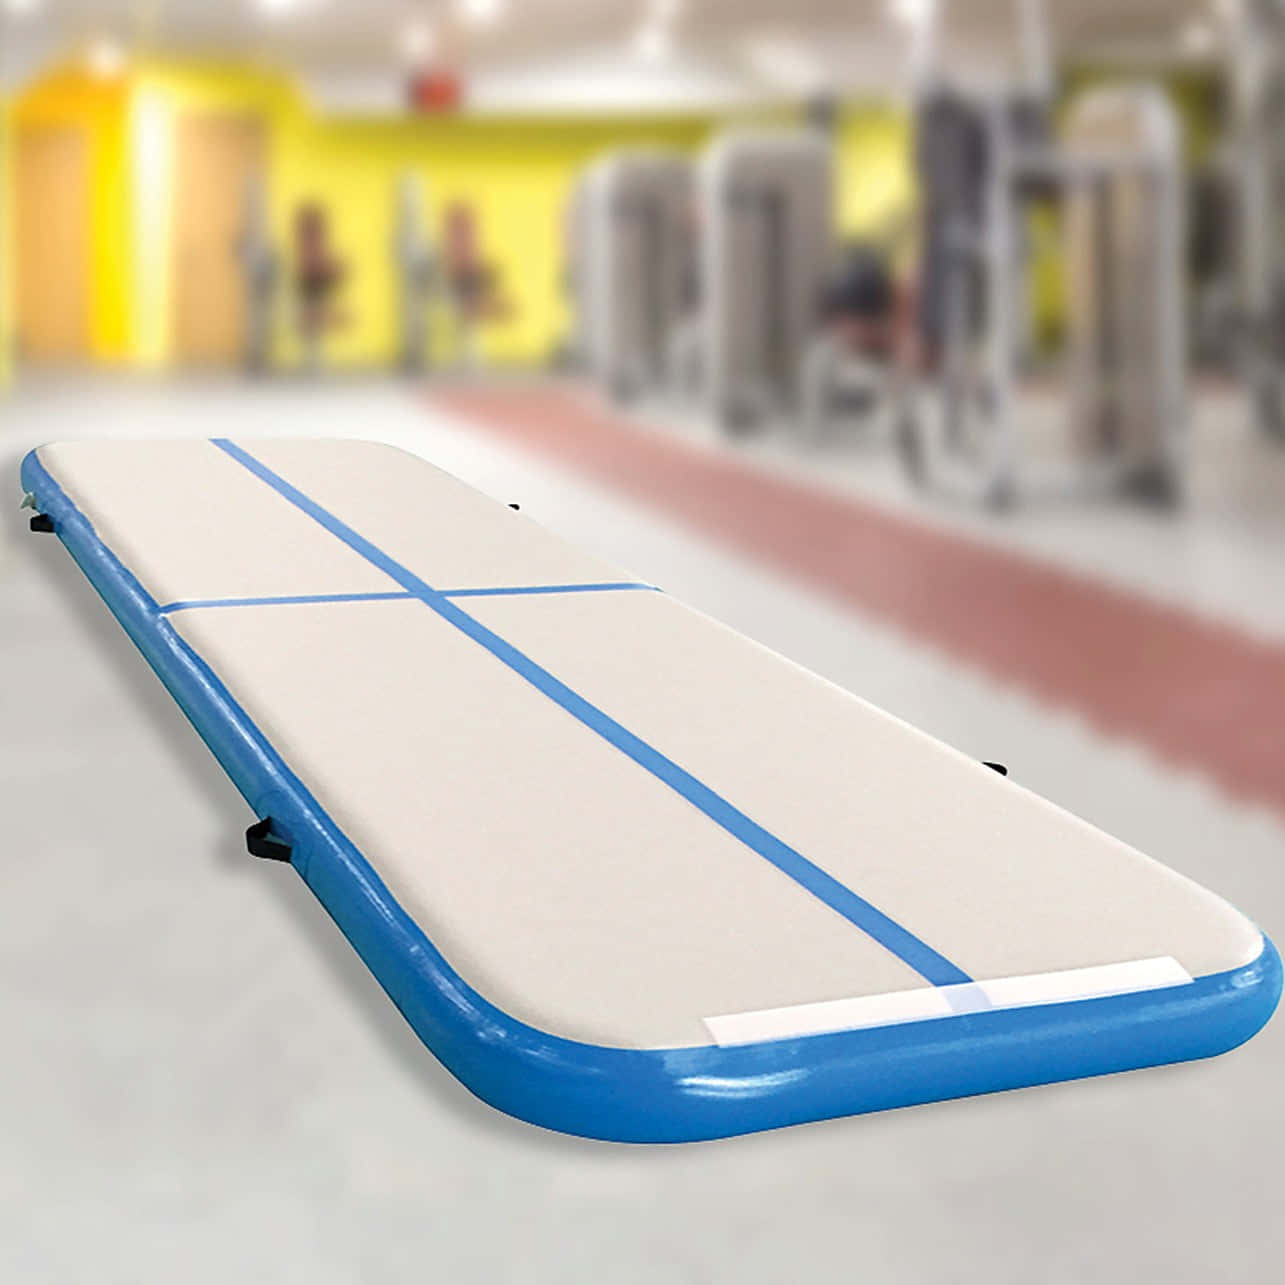 Perfectly crafted, this gymnastics mat allows your body to reach its fullest potential. Wallpaper